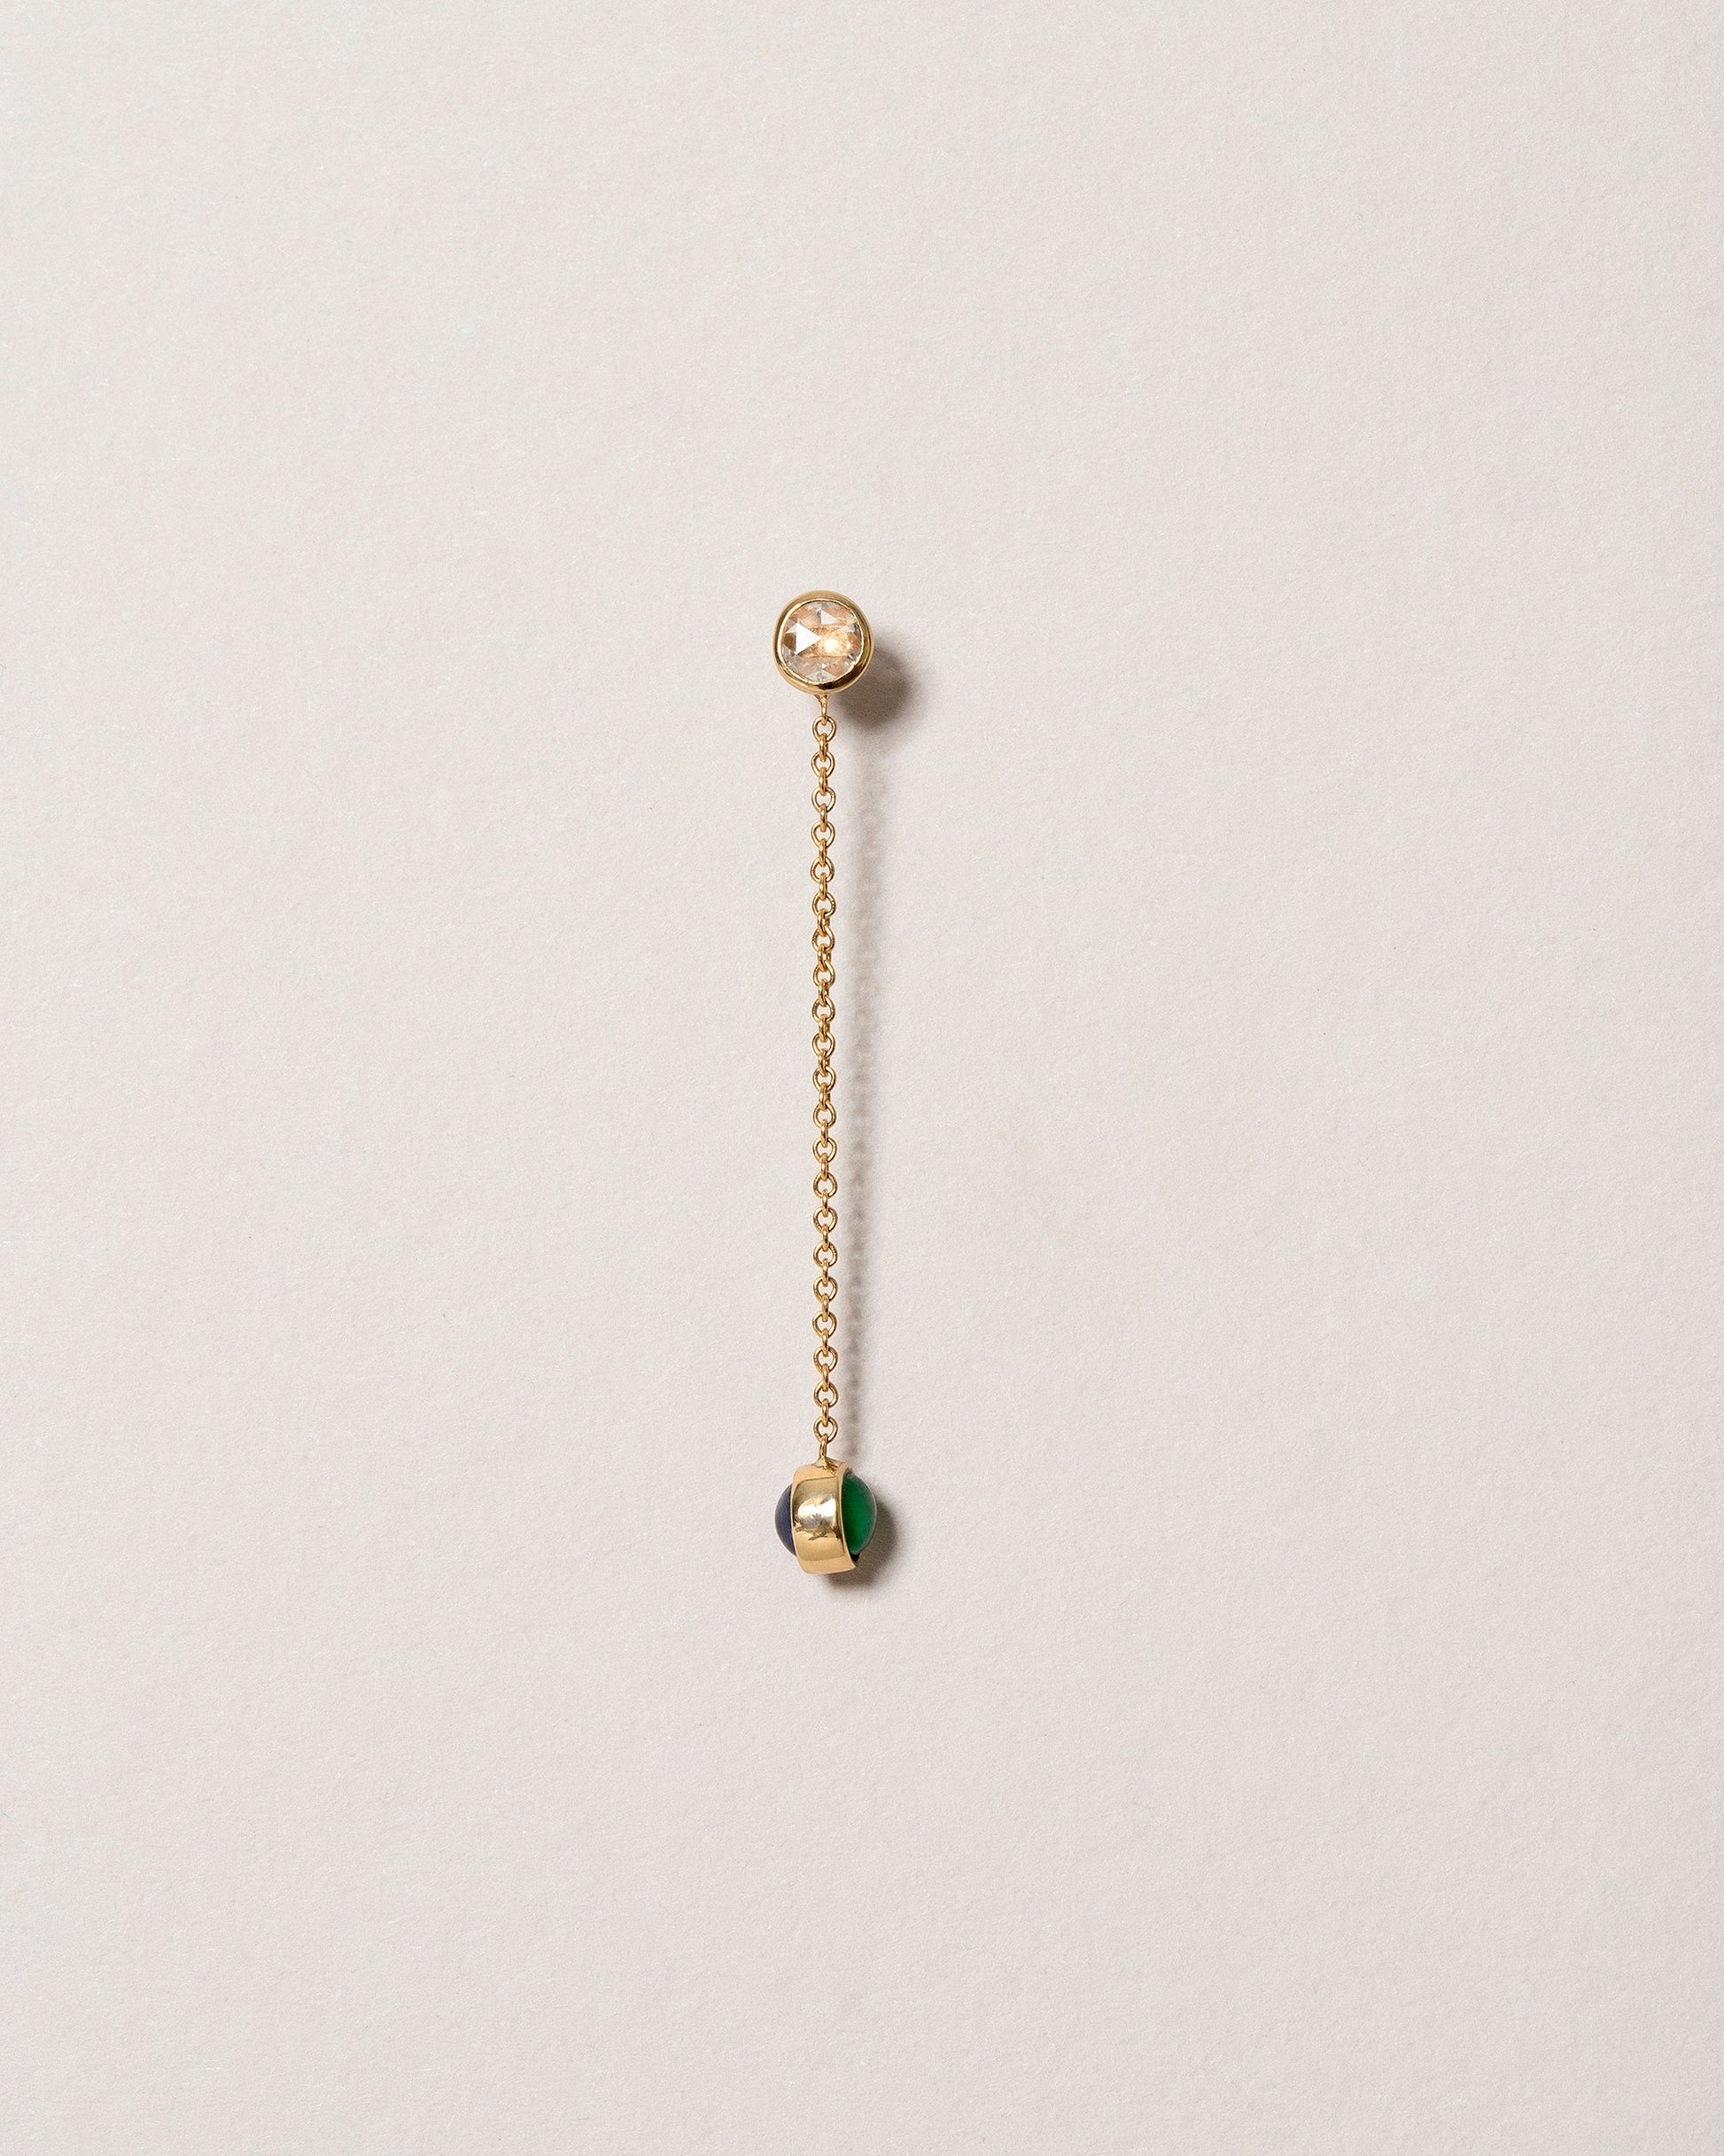  Birthstone One-Drop Single Earring on light color background.